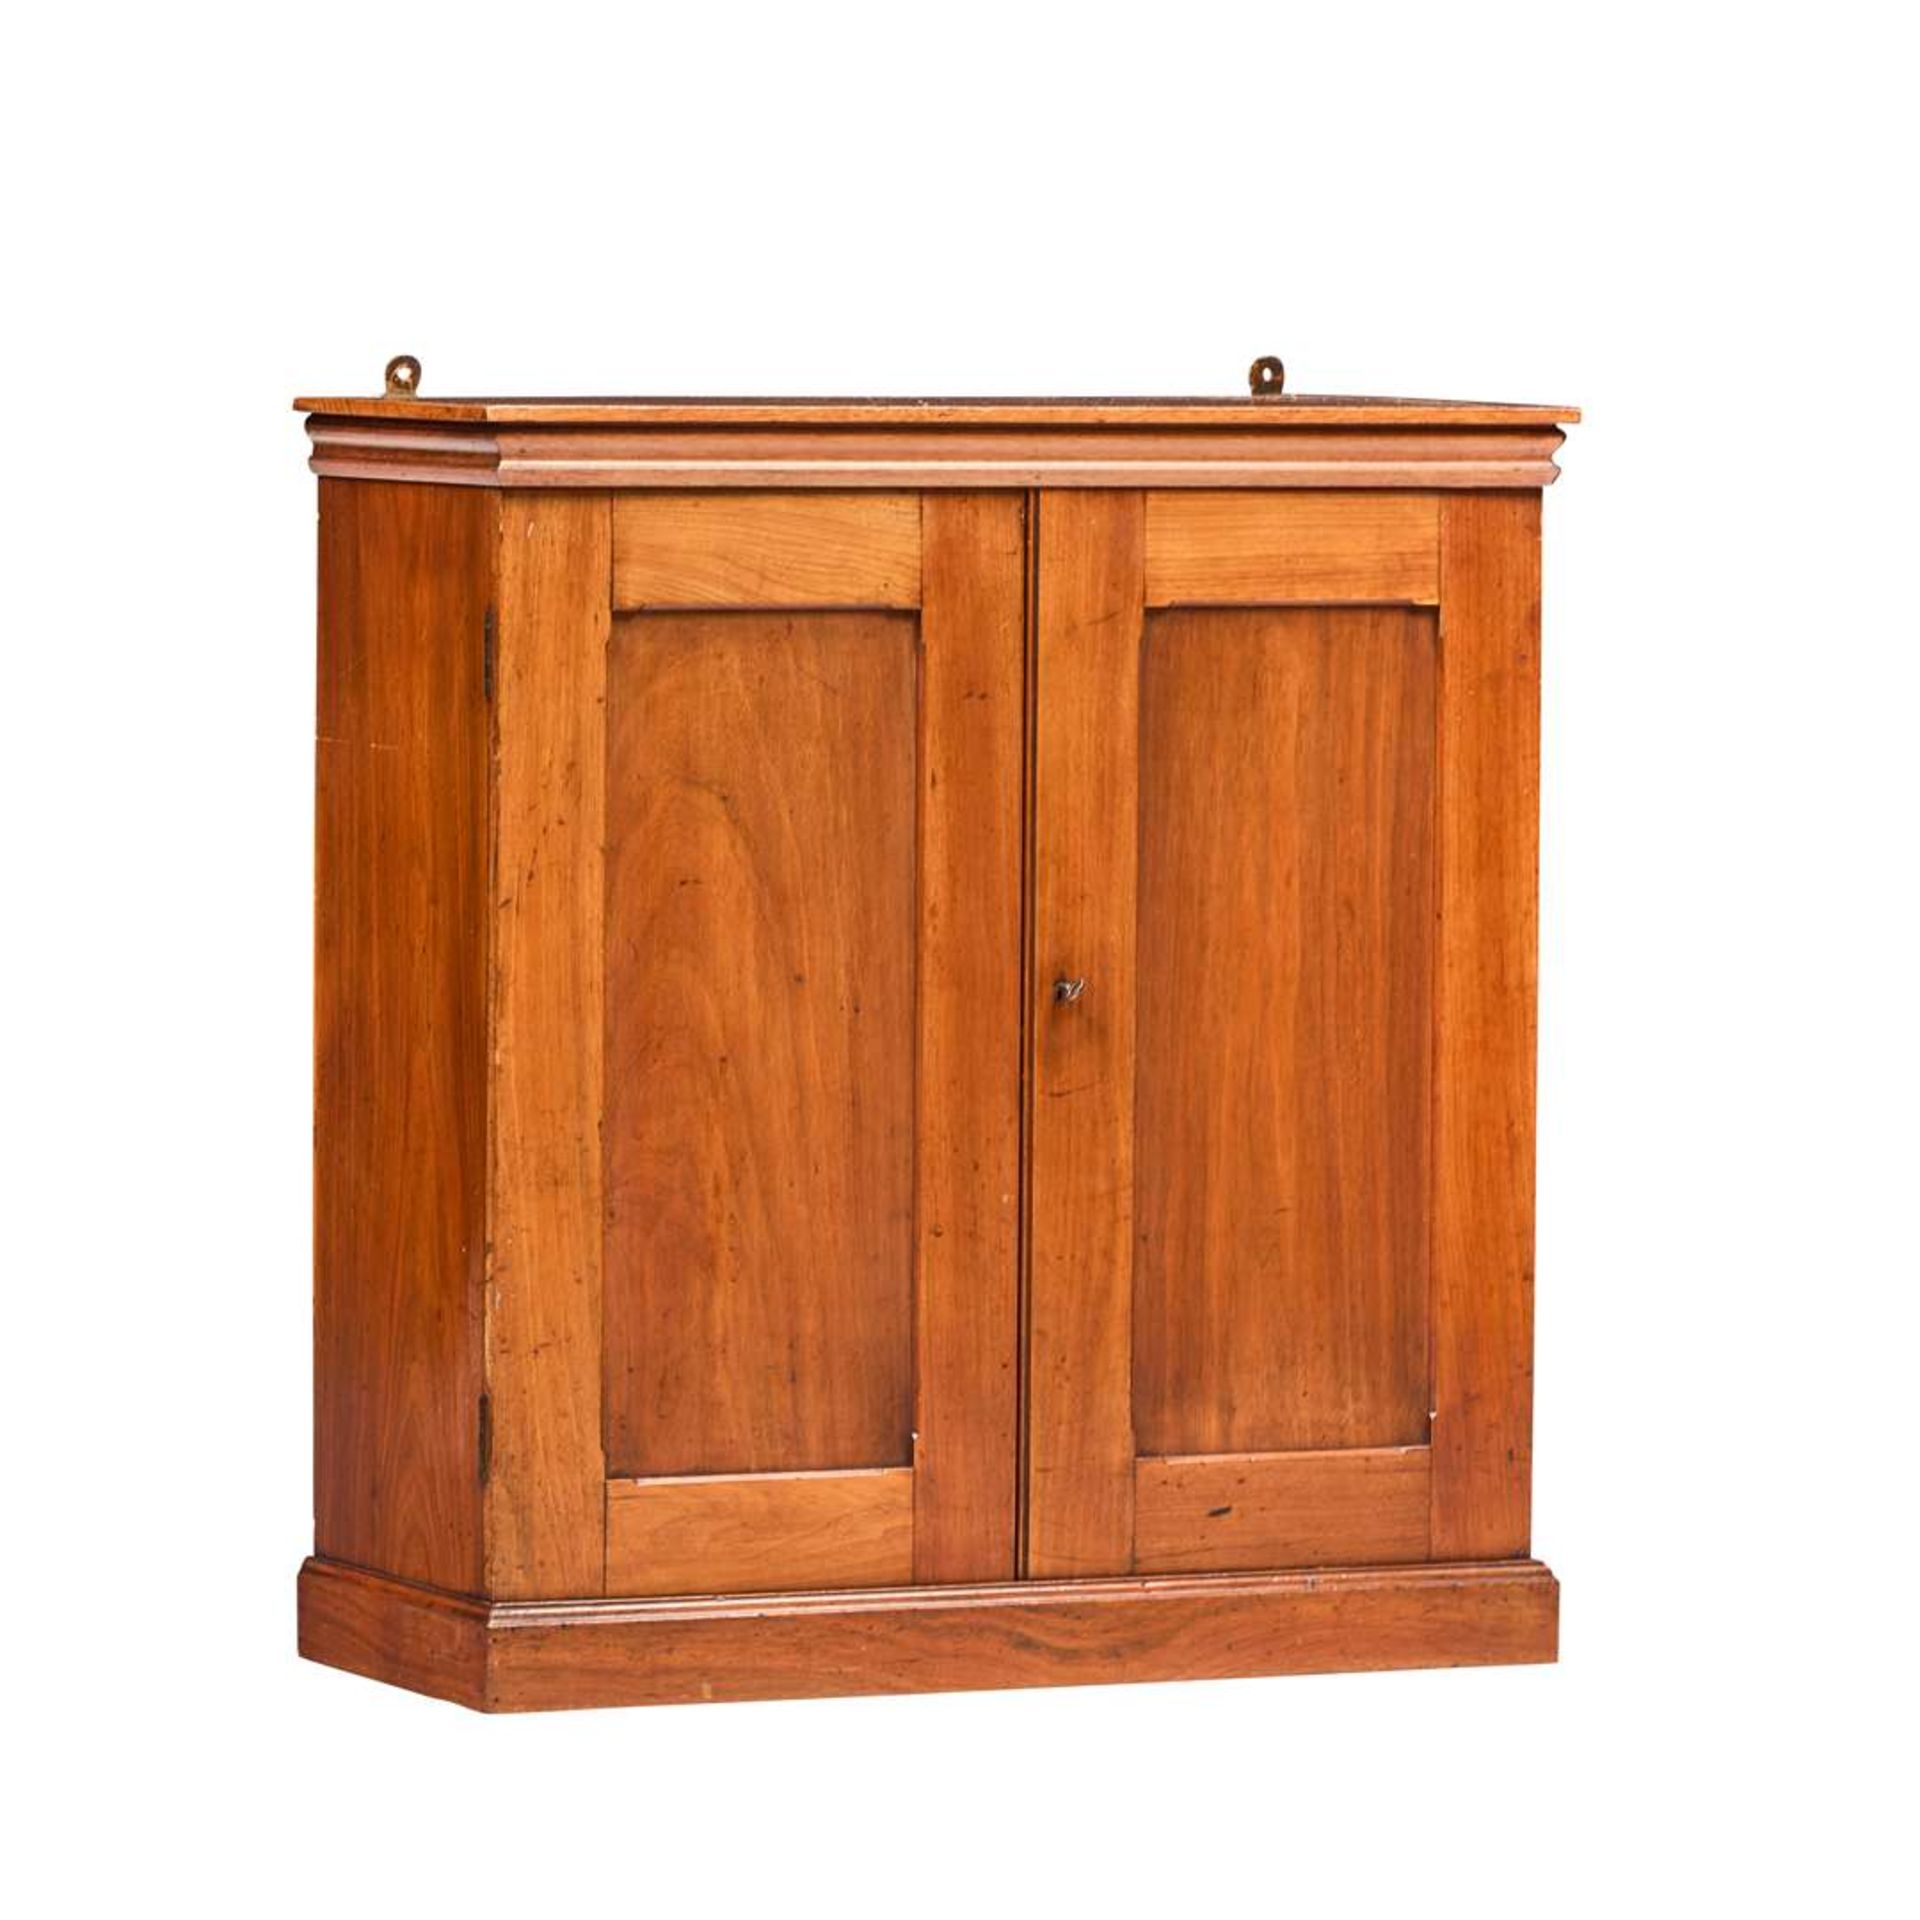 VICTORIAN WALNUT TABLE TOP ESTATE CABINET - Image 2 of 2